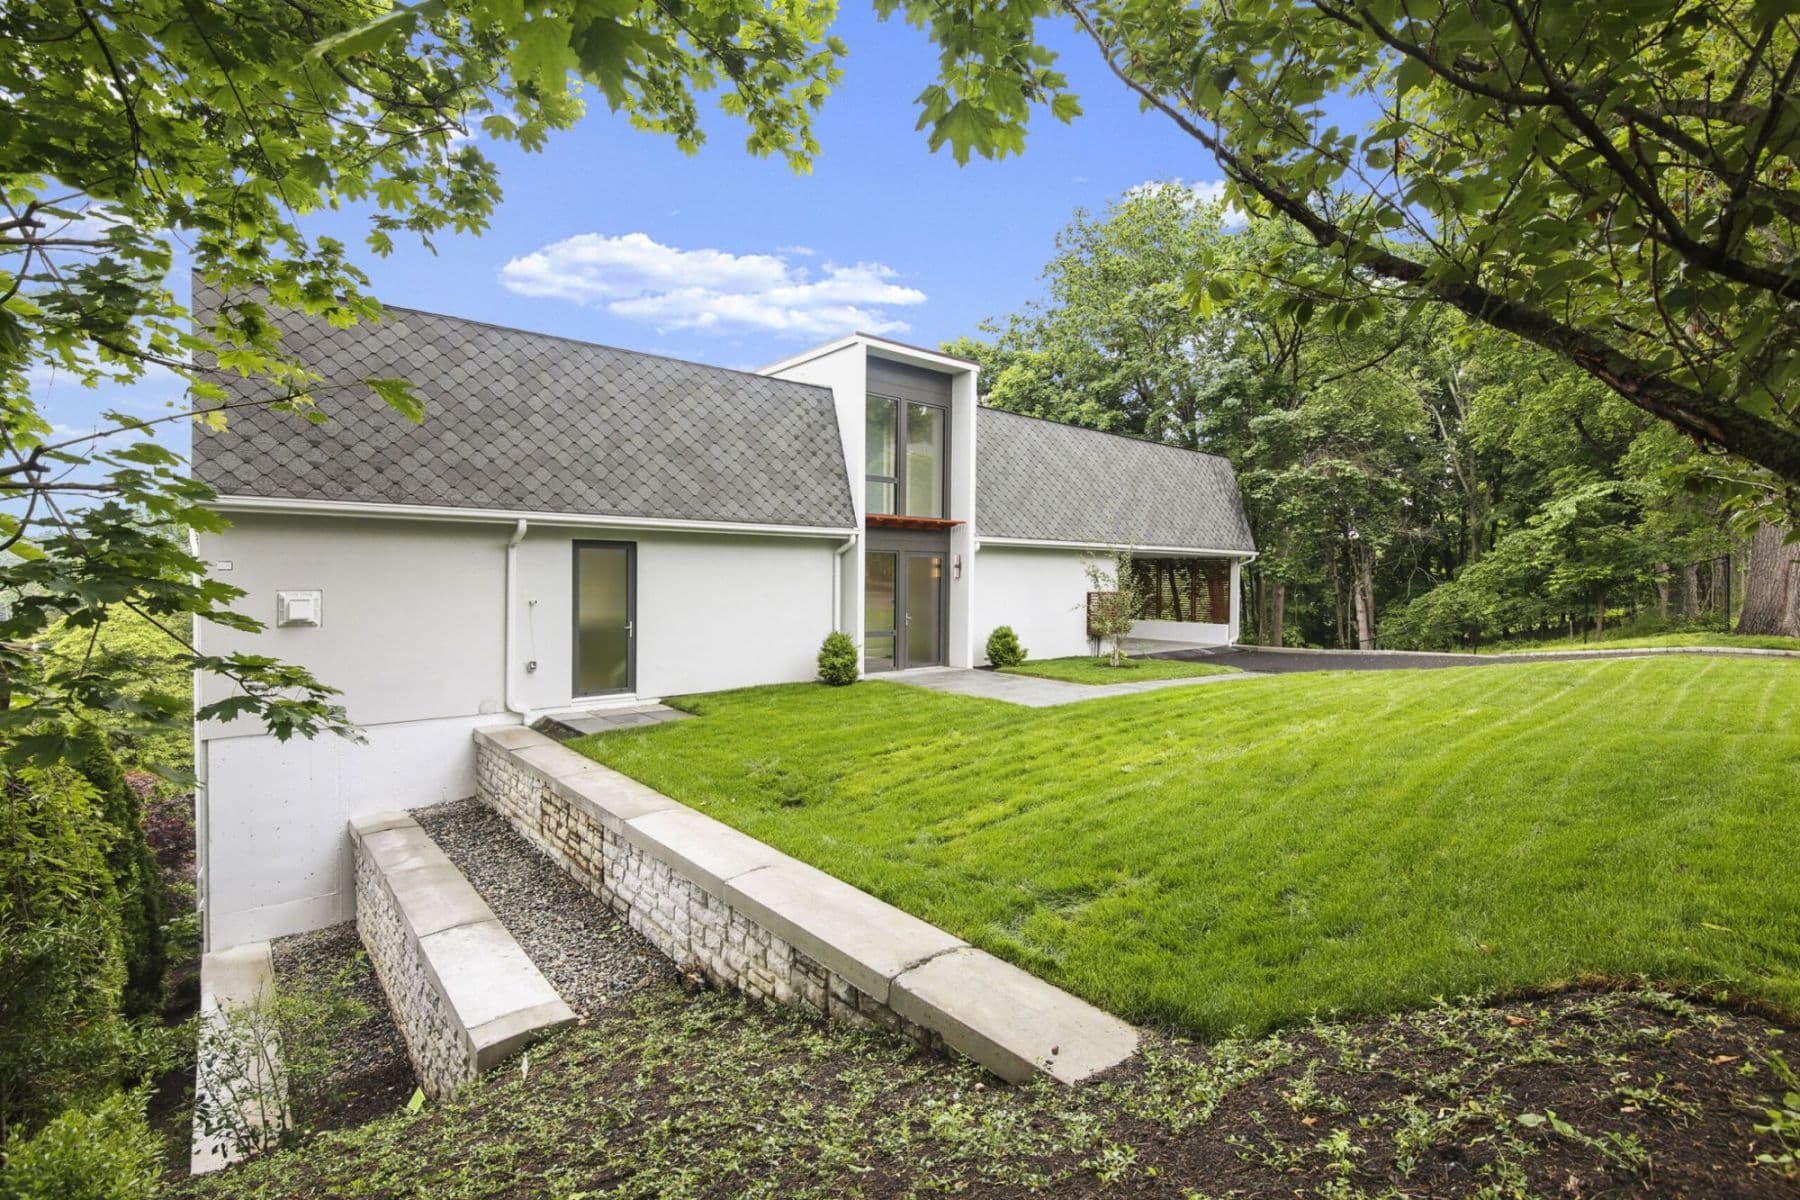 63-new-certified-zero-energy-ready-home-greenwich-ct-